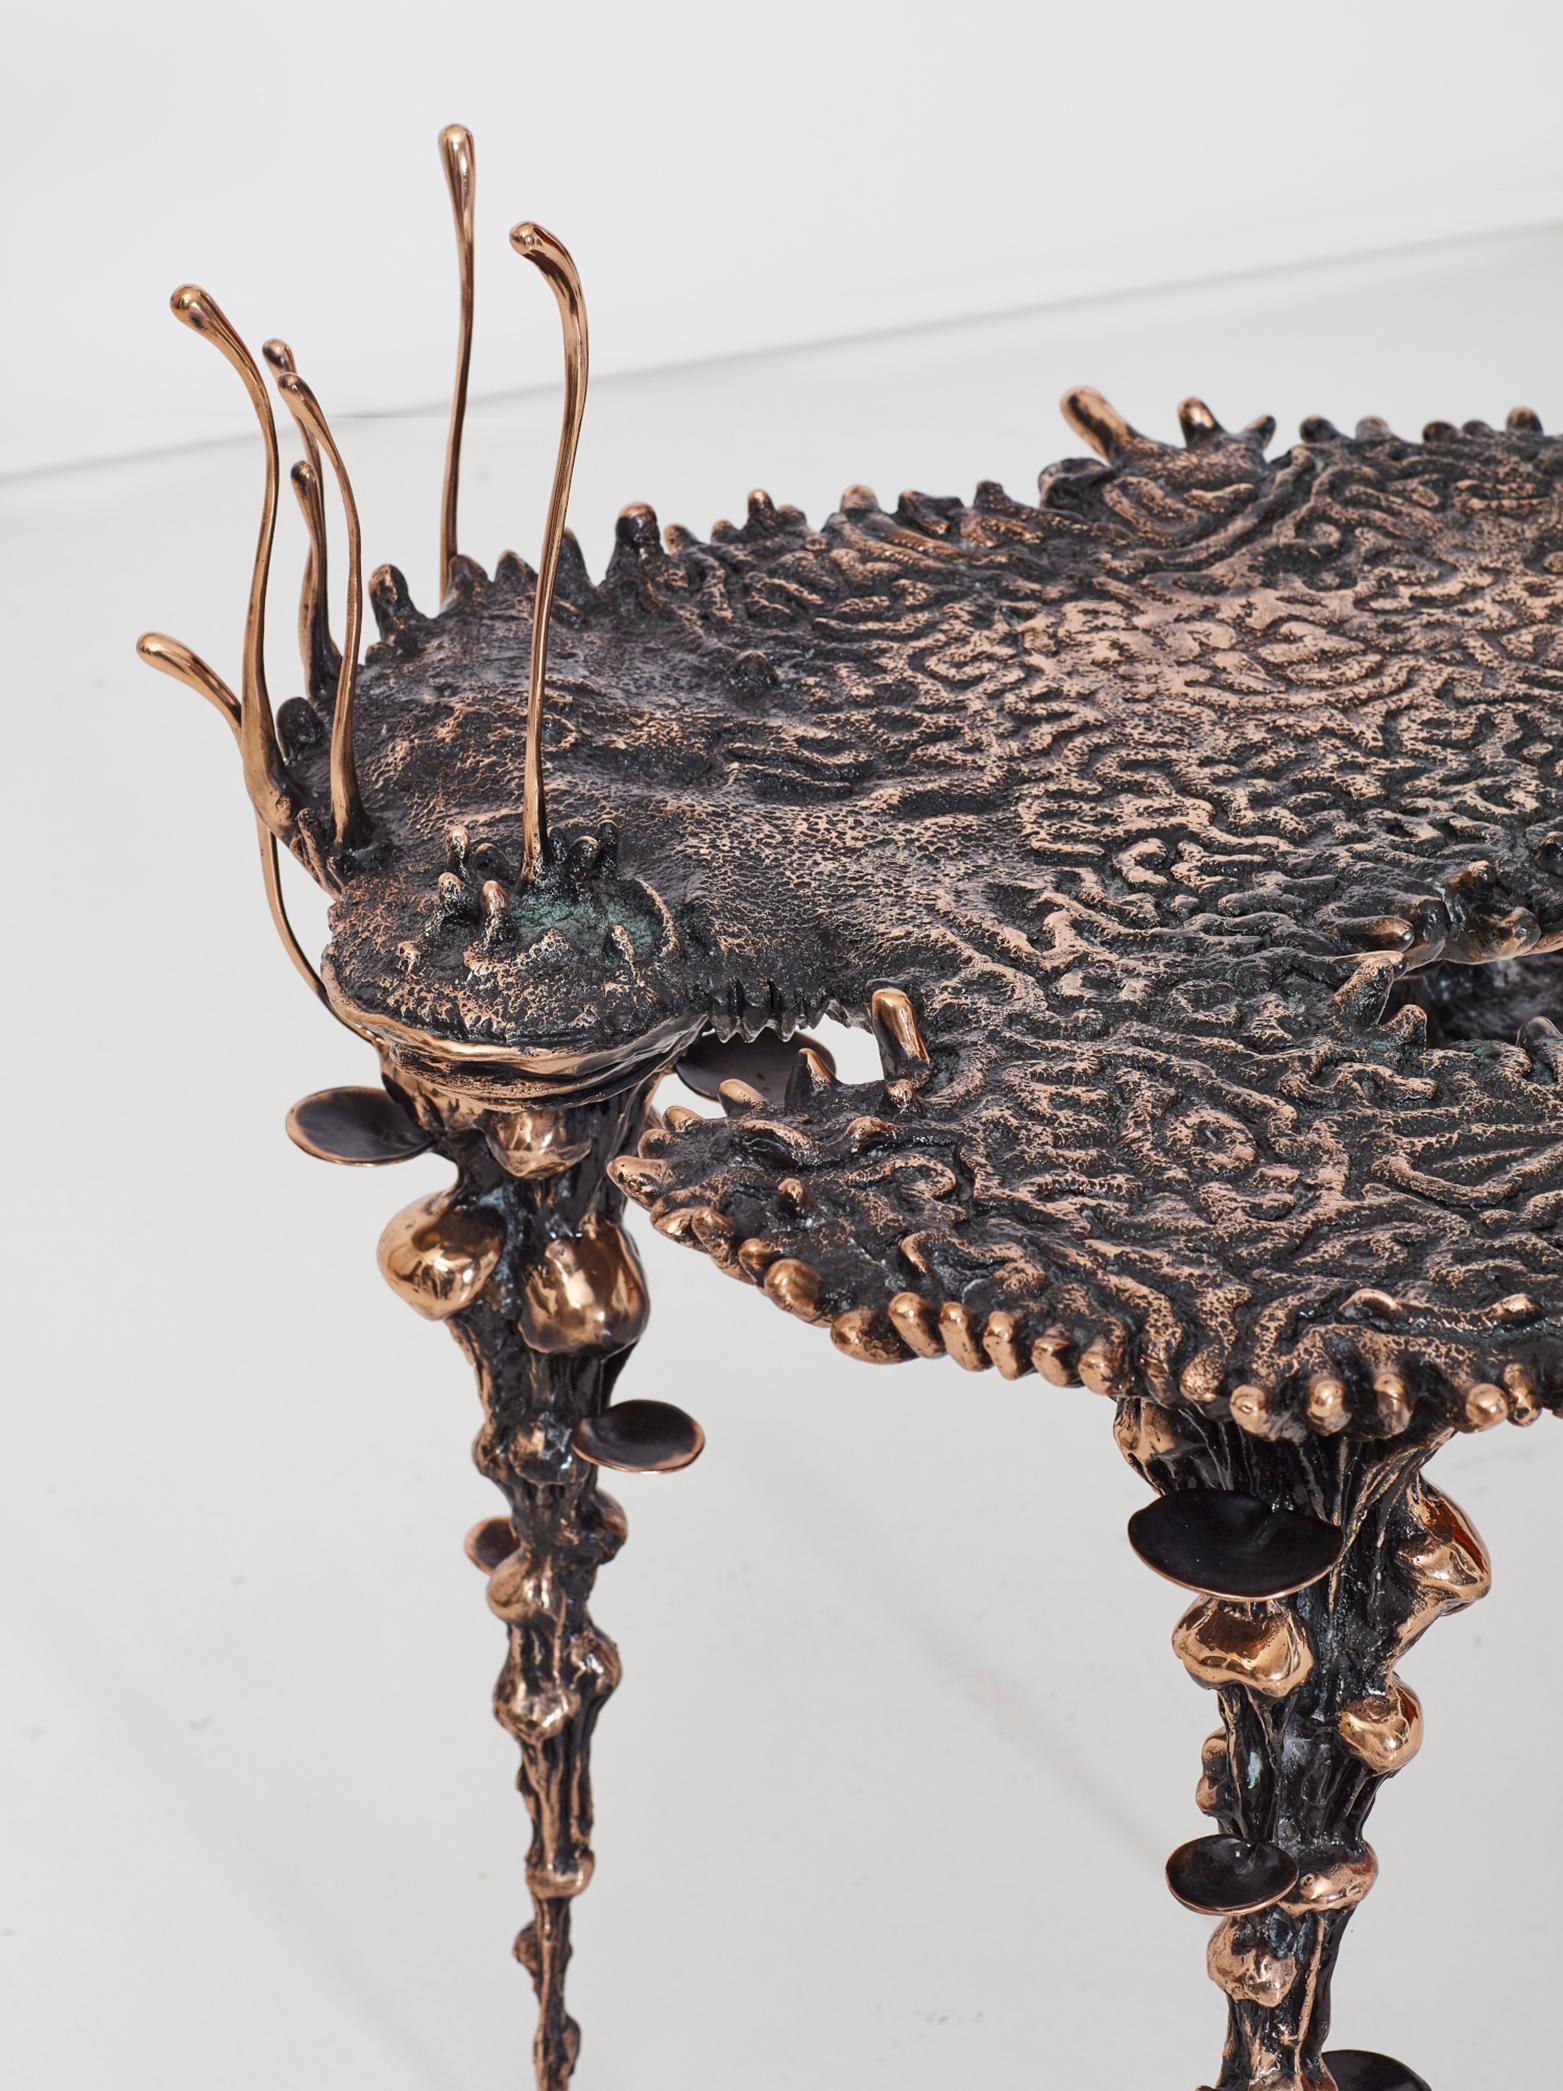 This side-table by sculptor Stanislaw Trzebinski appears alive and ancient at the same time. The artist is deeply inspired by the natural world – by the ocean life he encountered diving off the East African coast and the wildlife of the Rift